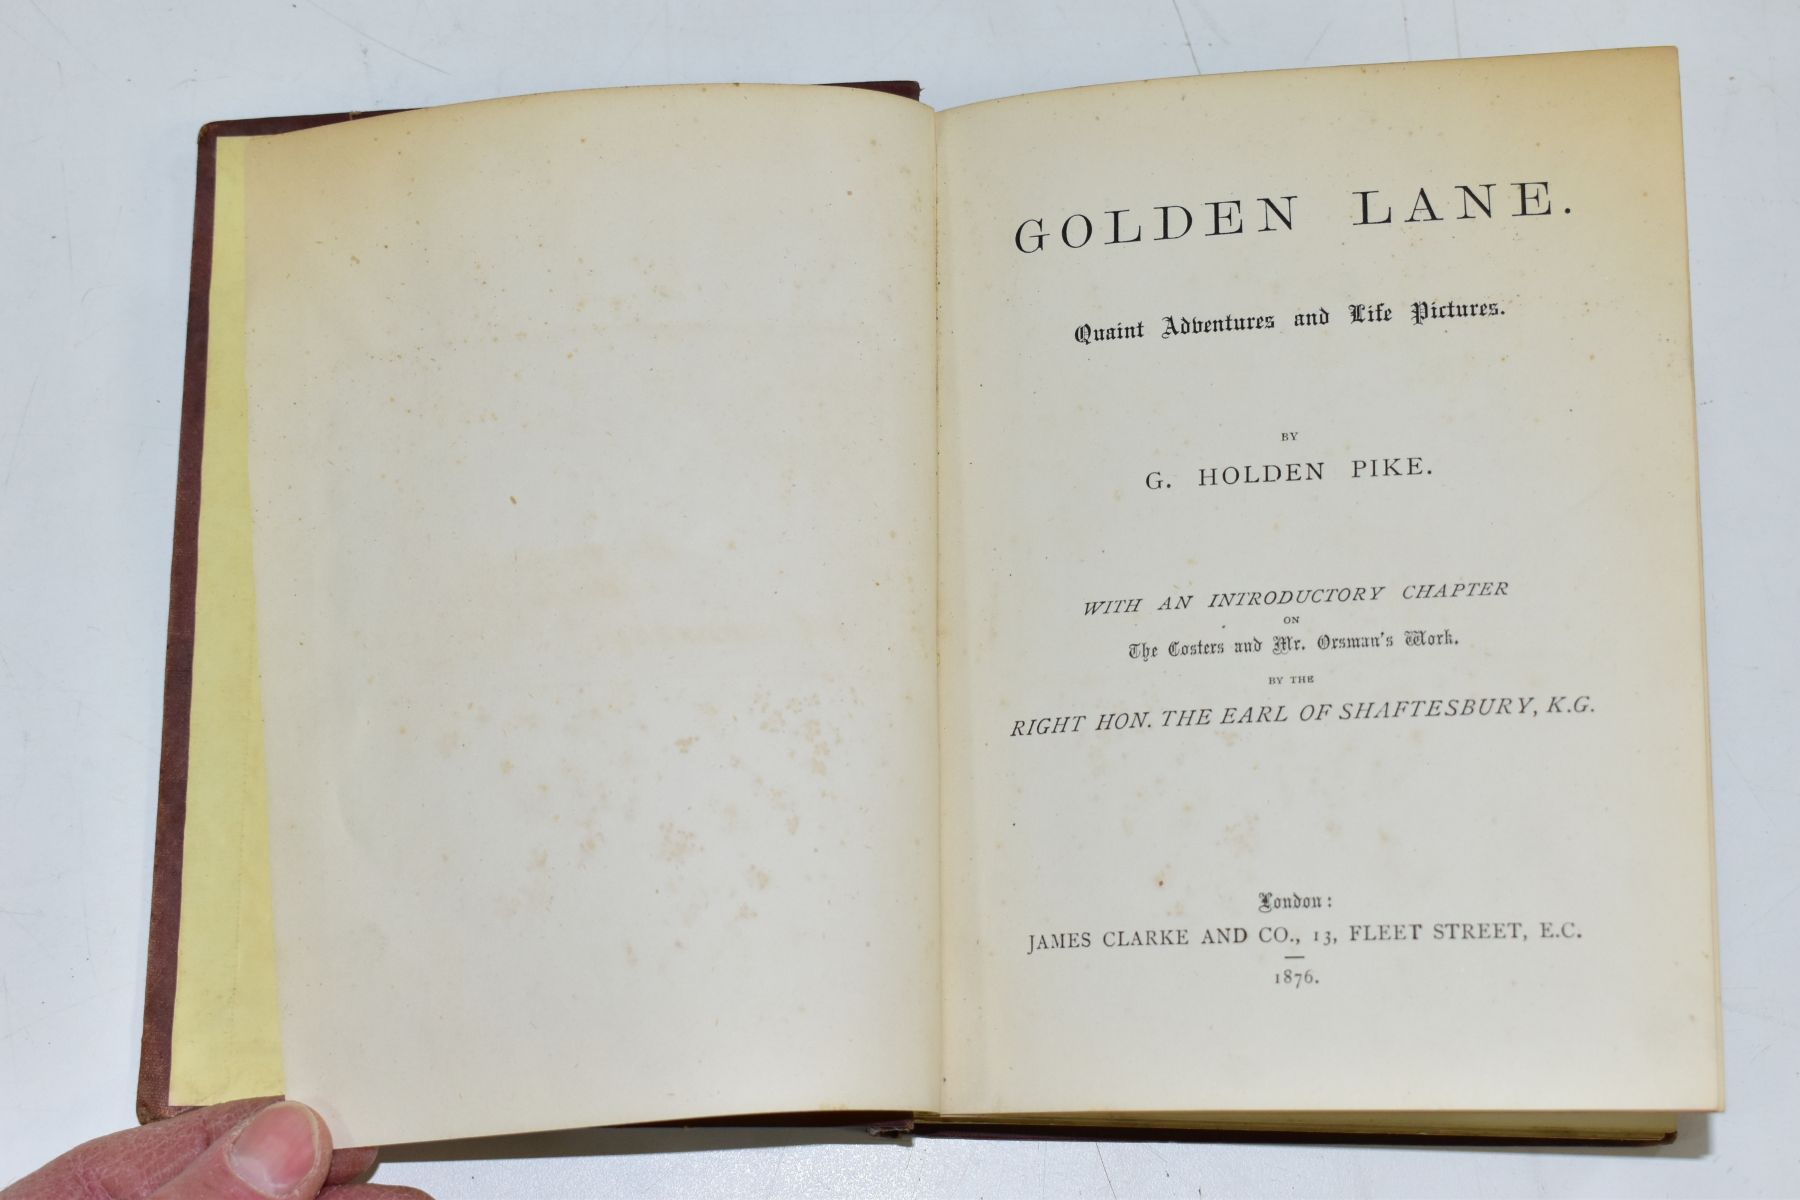 PIKE; Holden, G. Golden Lane. Quaint Adventures and Life Pictures with an introductory chapter on - Image 3 of 7